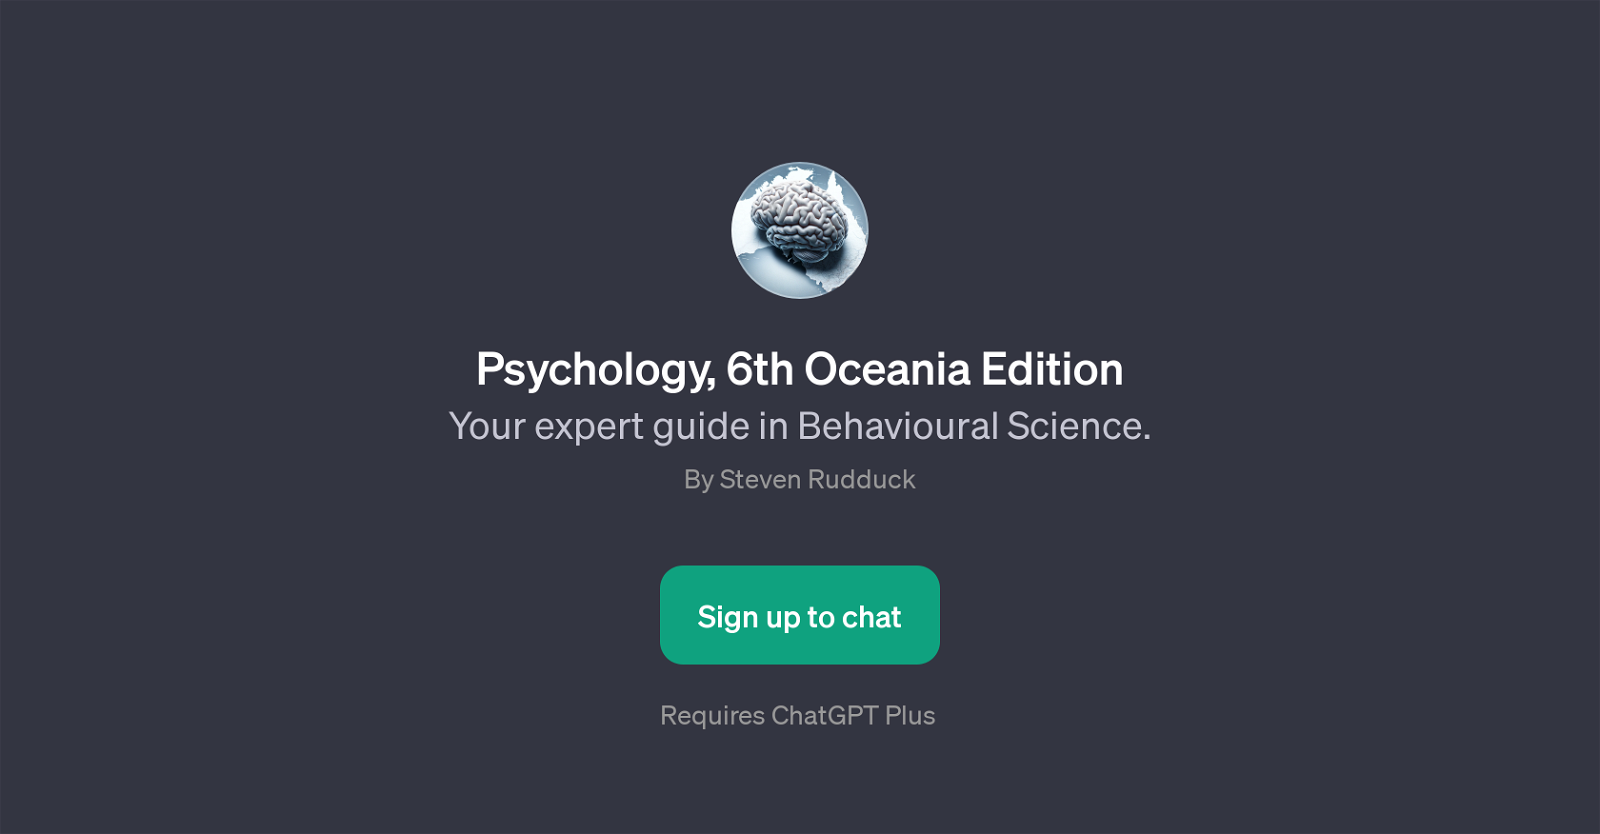 Psychology, 6th Oceania Edition website